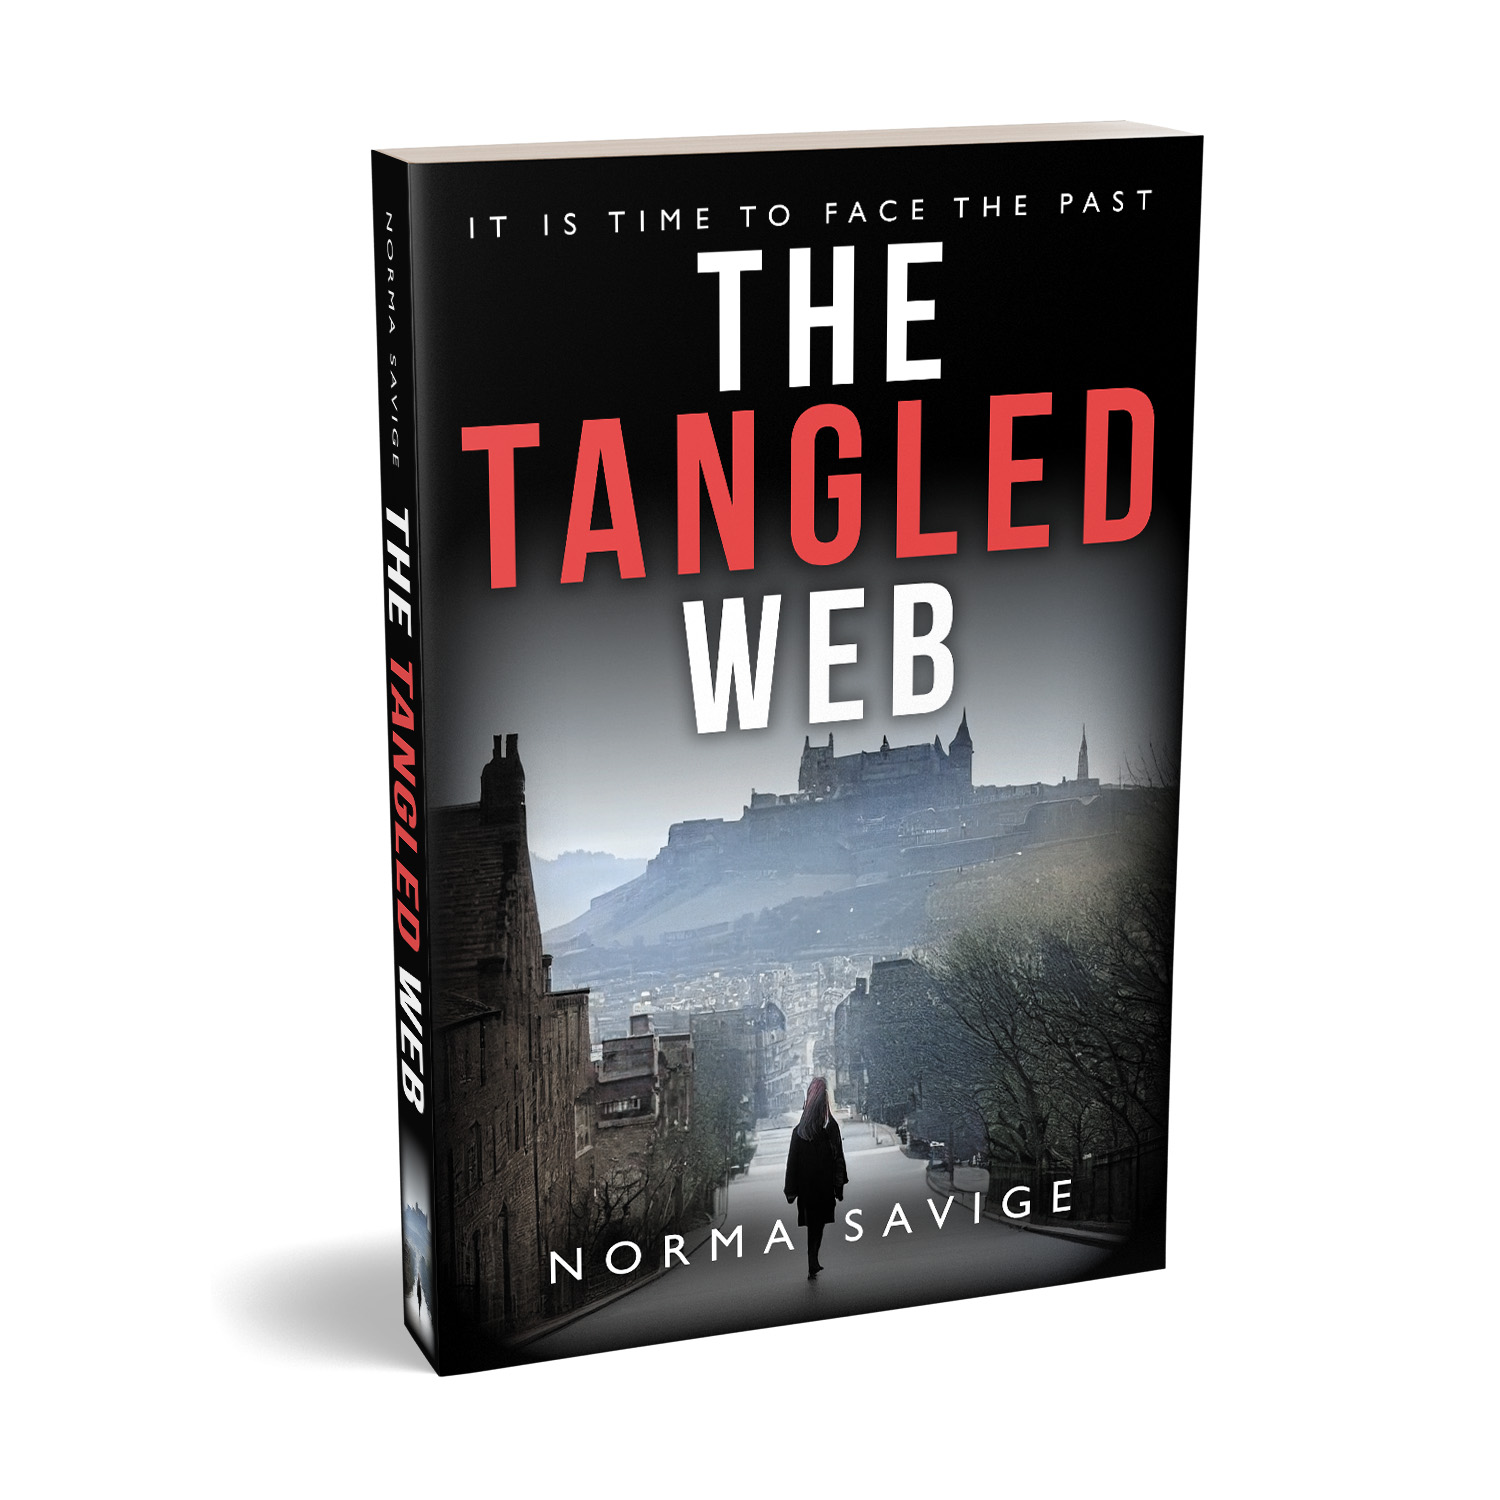 'The Tangled Web' is a slowburning crime thriller set in Edinburgh. The author is Norma Savige. The book cover and interior design are by Mark Thomas. To learn more about what Mark could do for your book, please visit coverness.com.